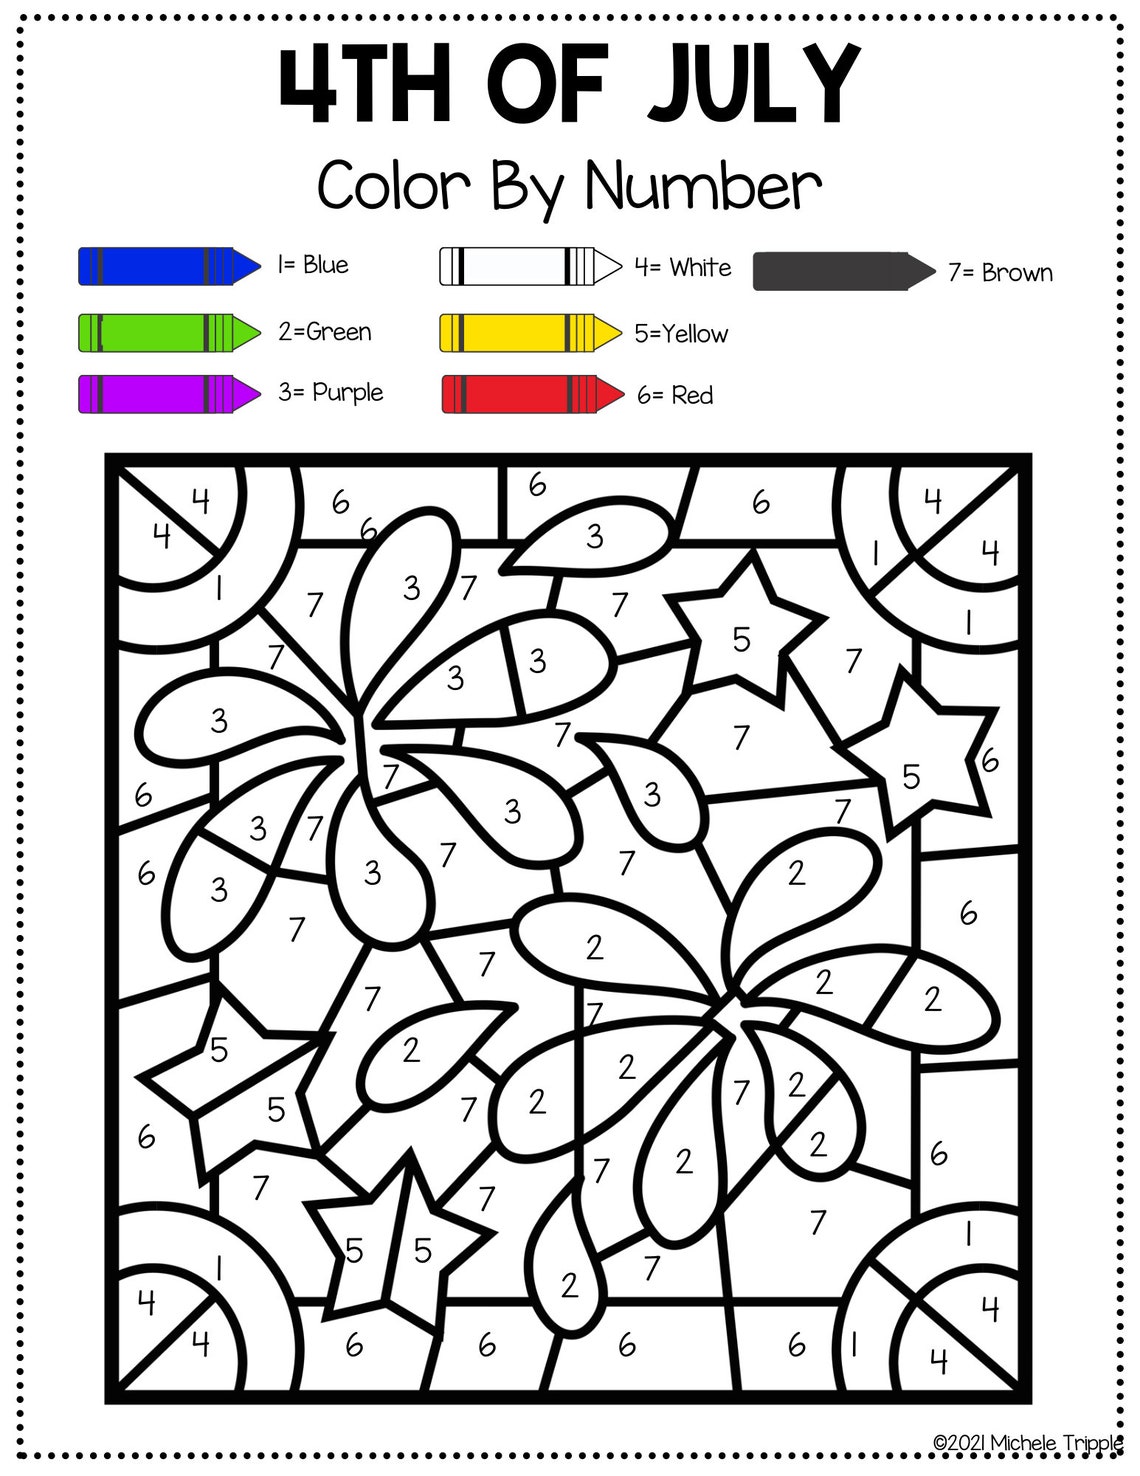 4th-of-july-color-by-number-sheets-are-perfect-activity-for-etsy